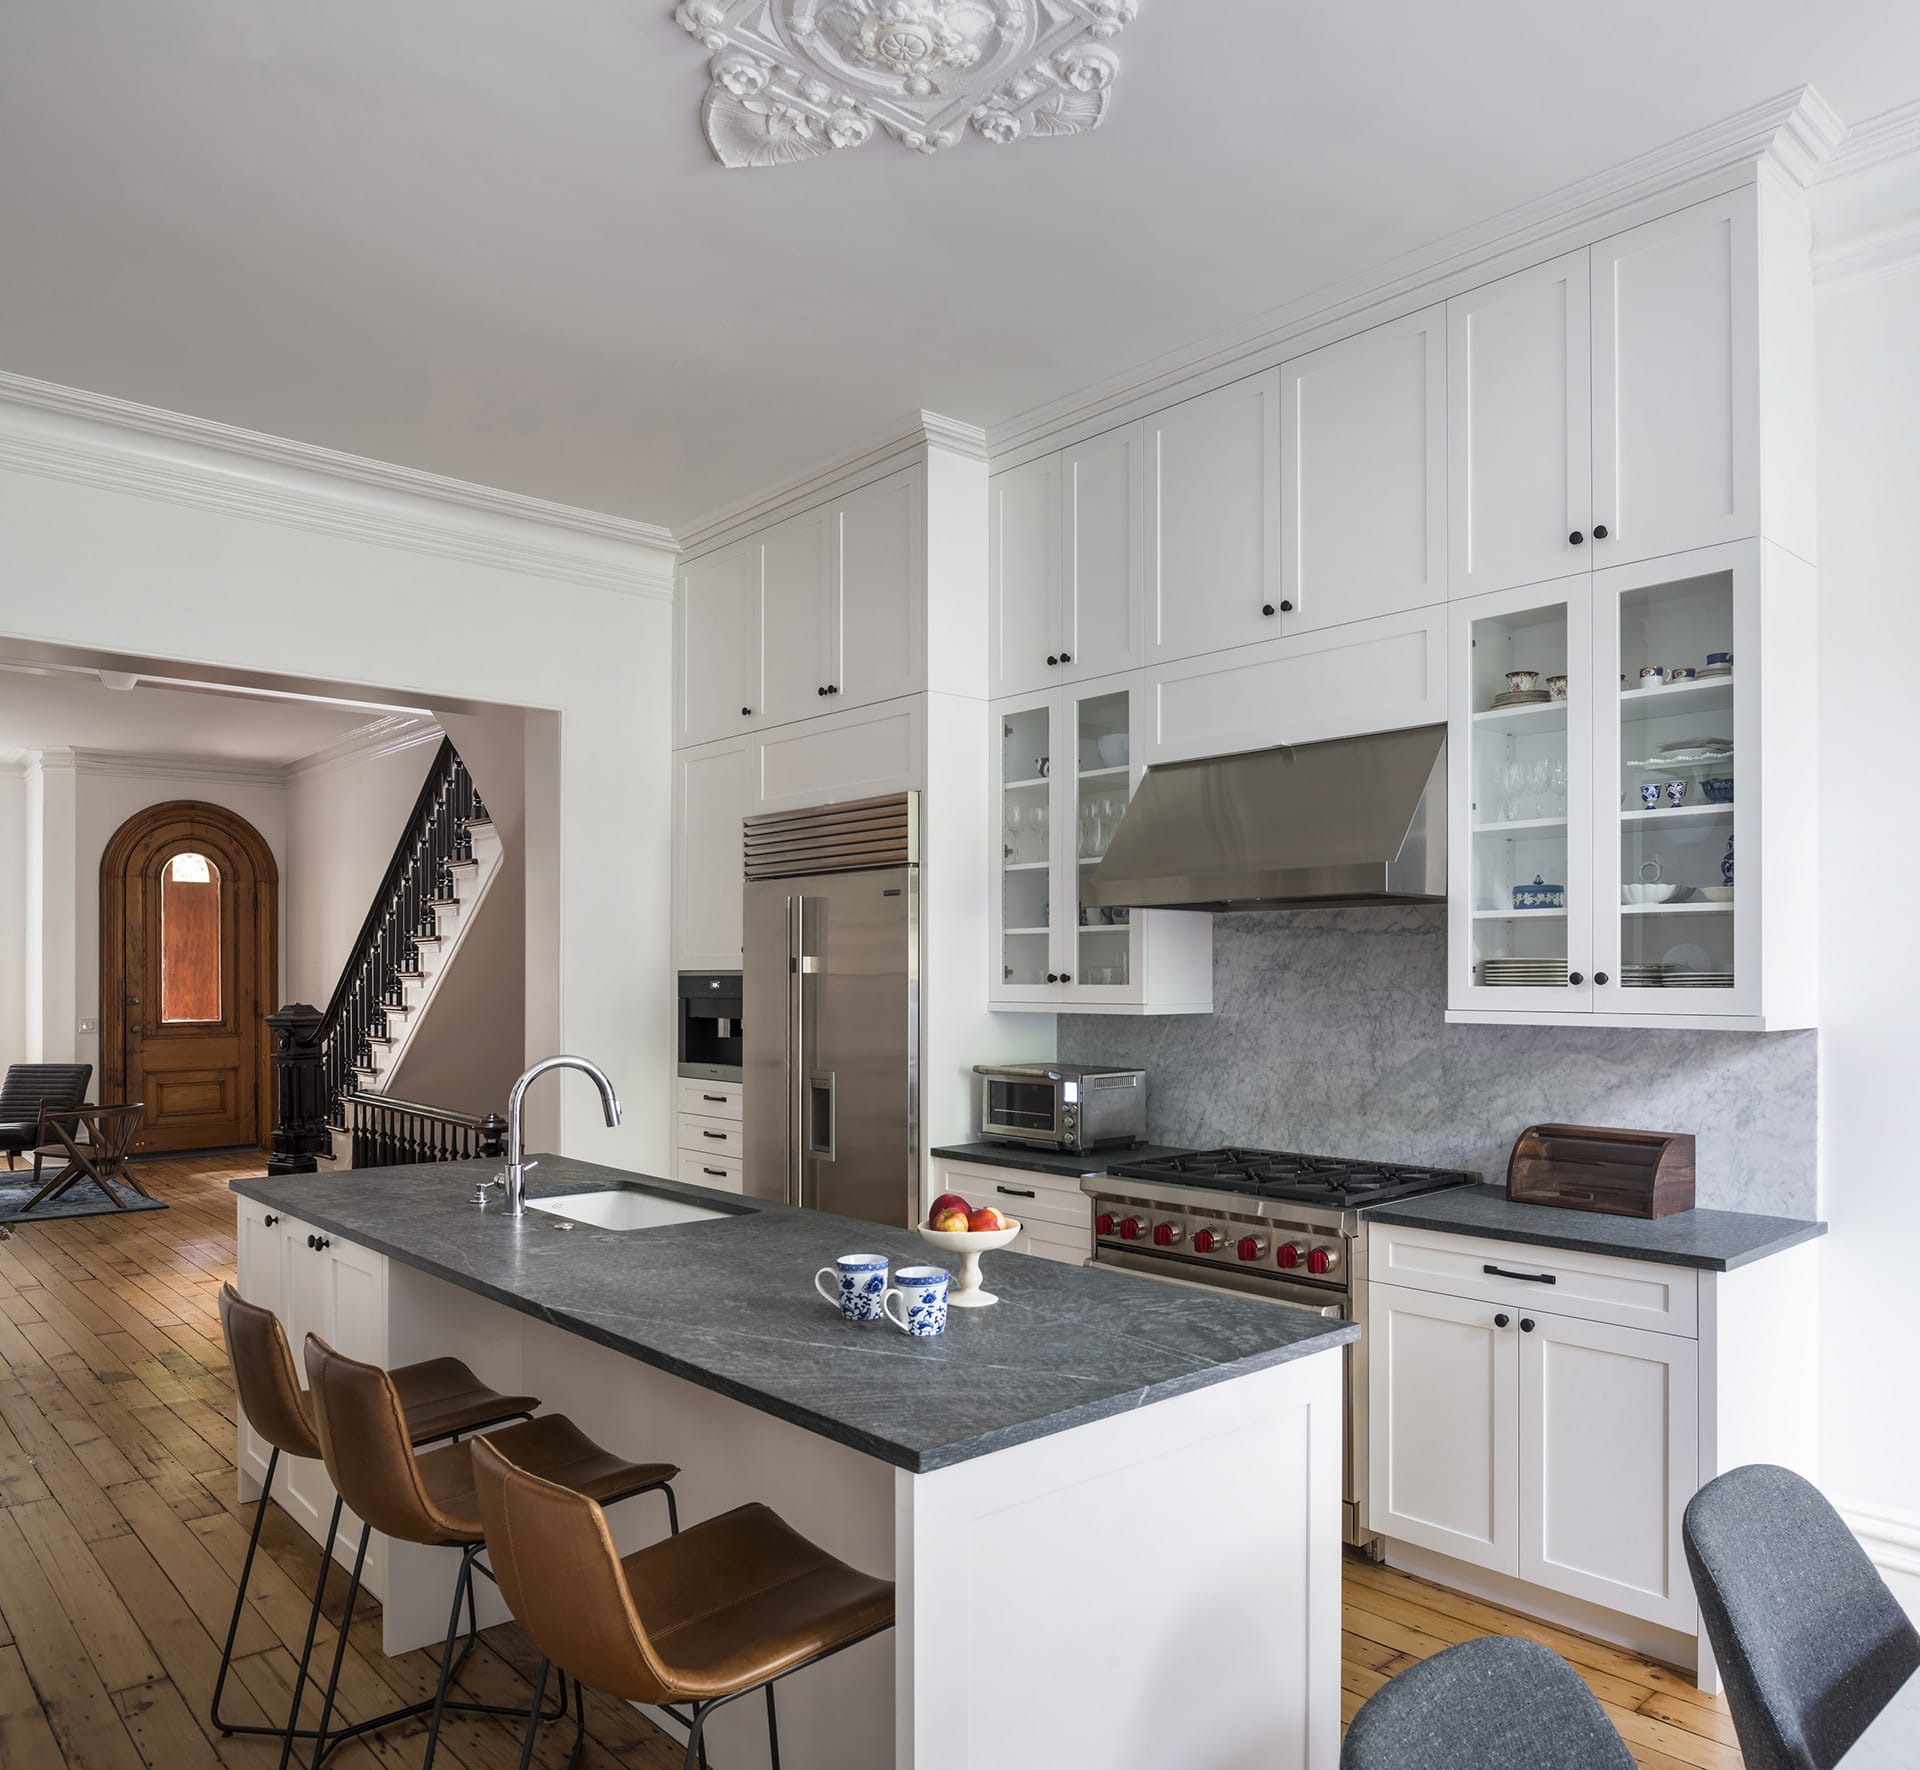 Renovated parlor floor of a Cobble Hill townhouse with natural wood floors and all-white walls and cabinetry.